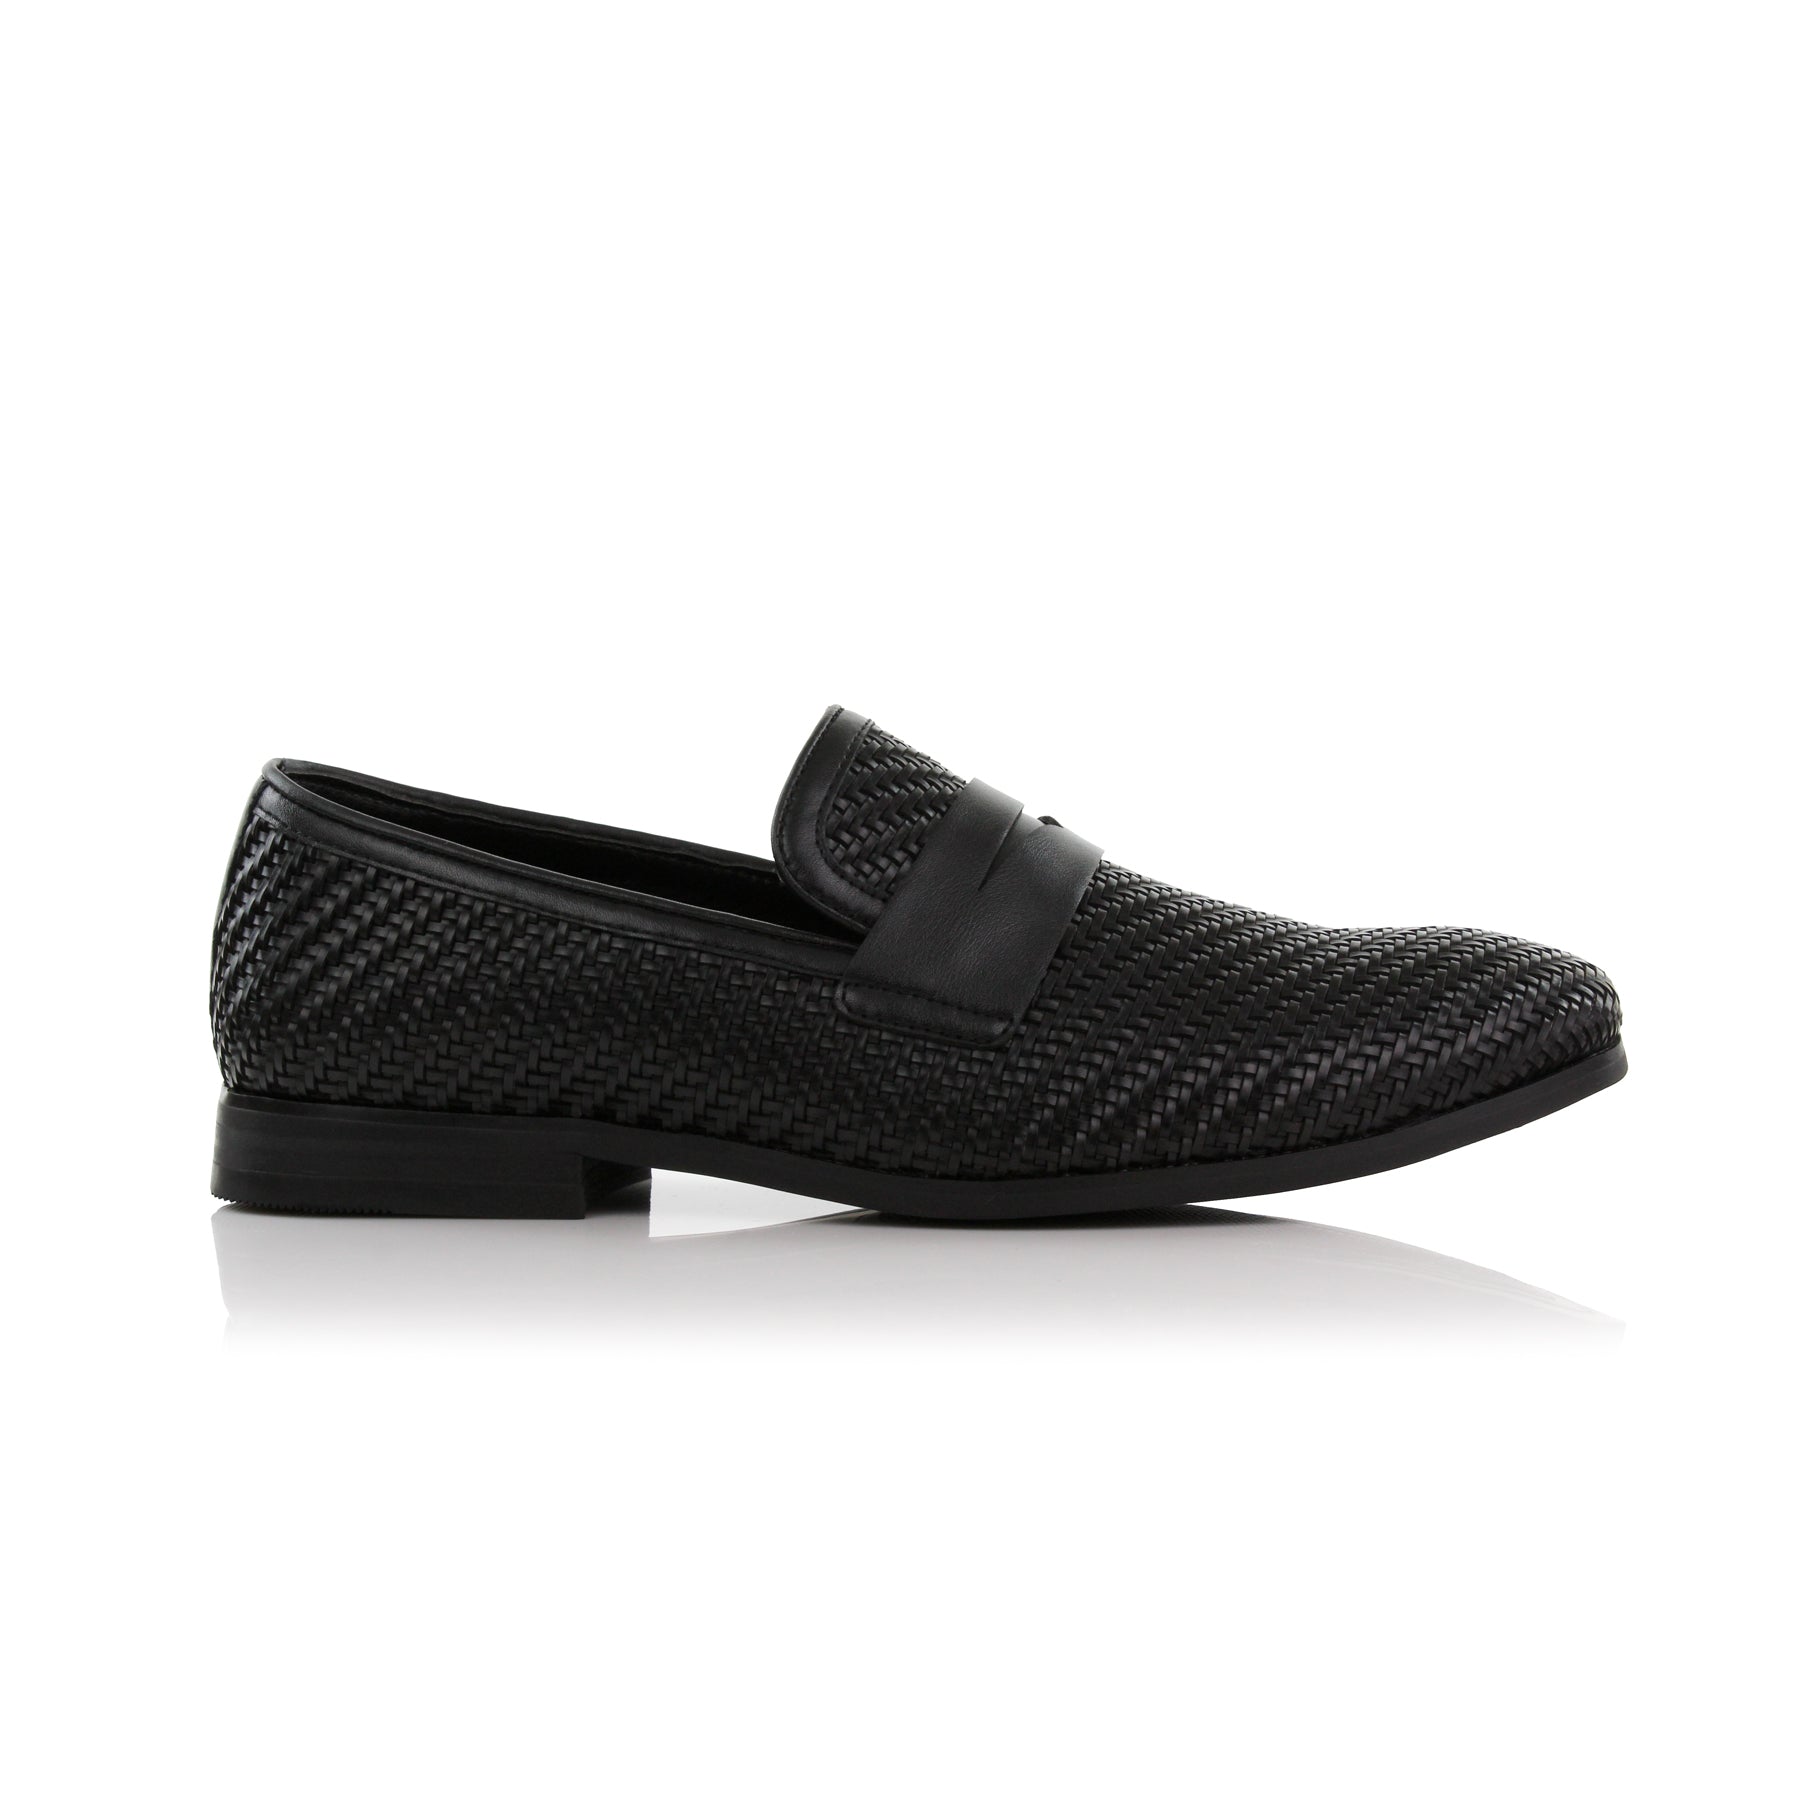 Woven Loafers | Louie by Ferro Aldo | Conal Footwear | Outer Side Angle View